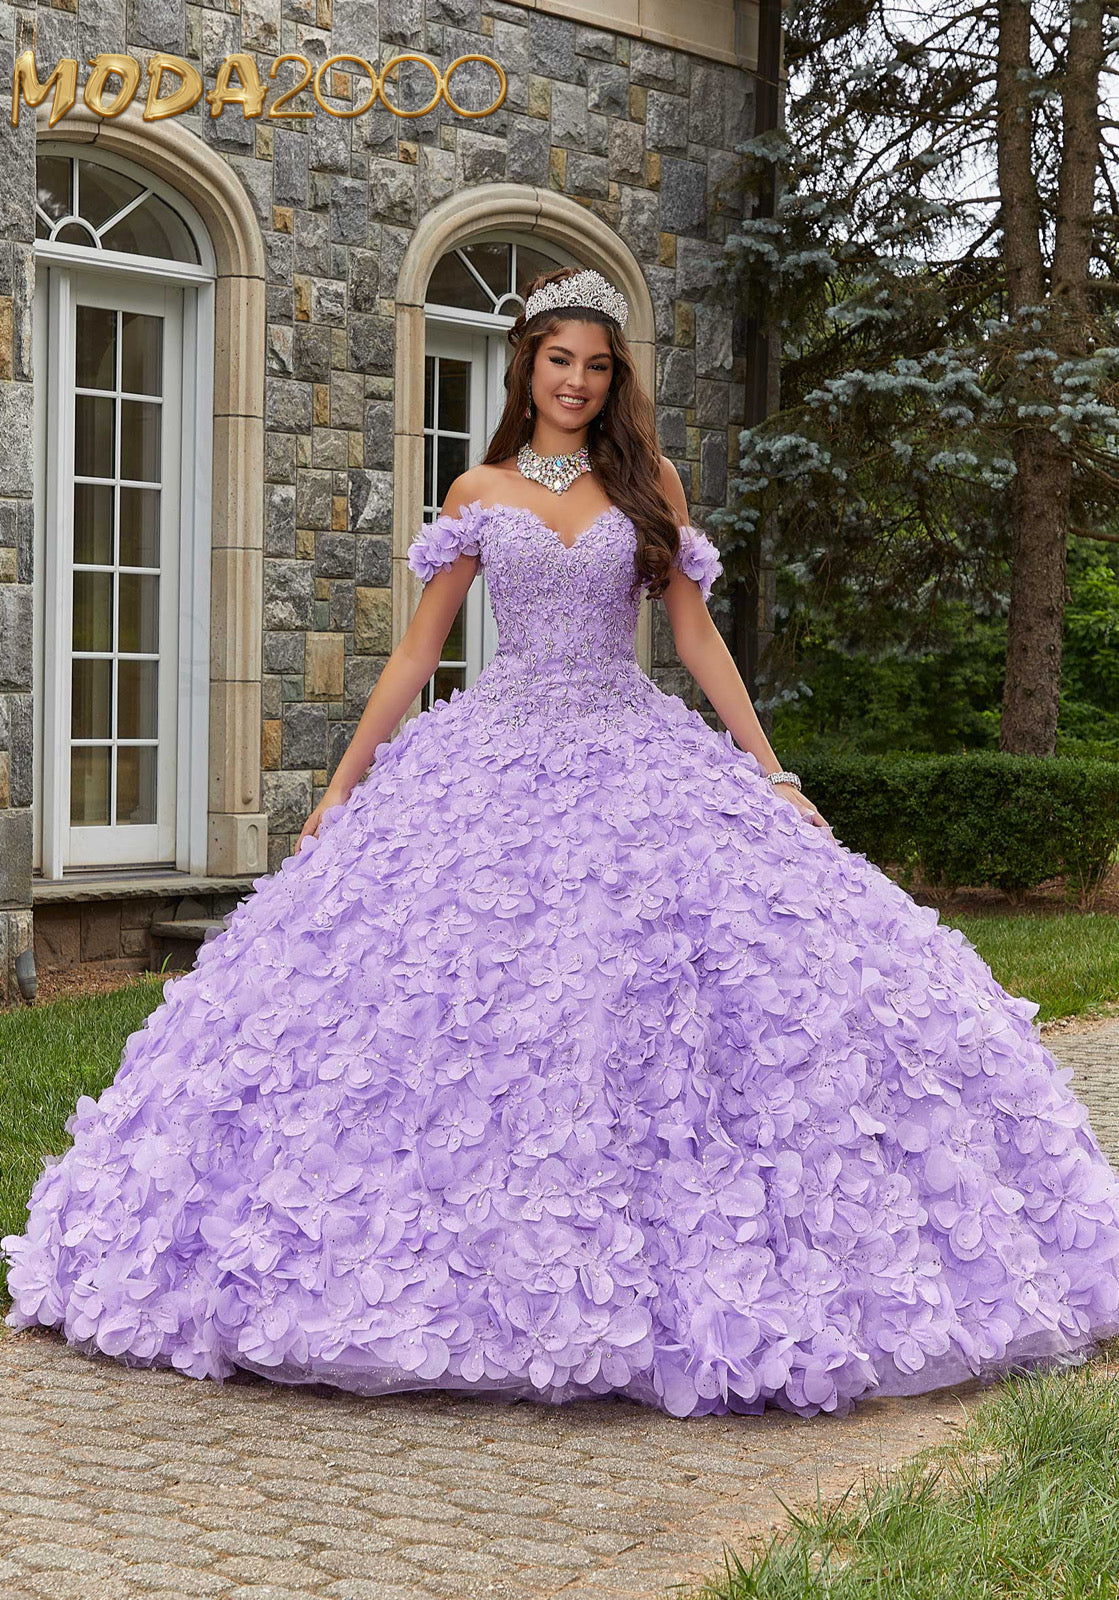 M2K89403 | Crystal Beaded Lace Quinceañera Dress with Floral Skirt